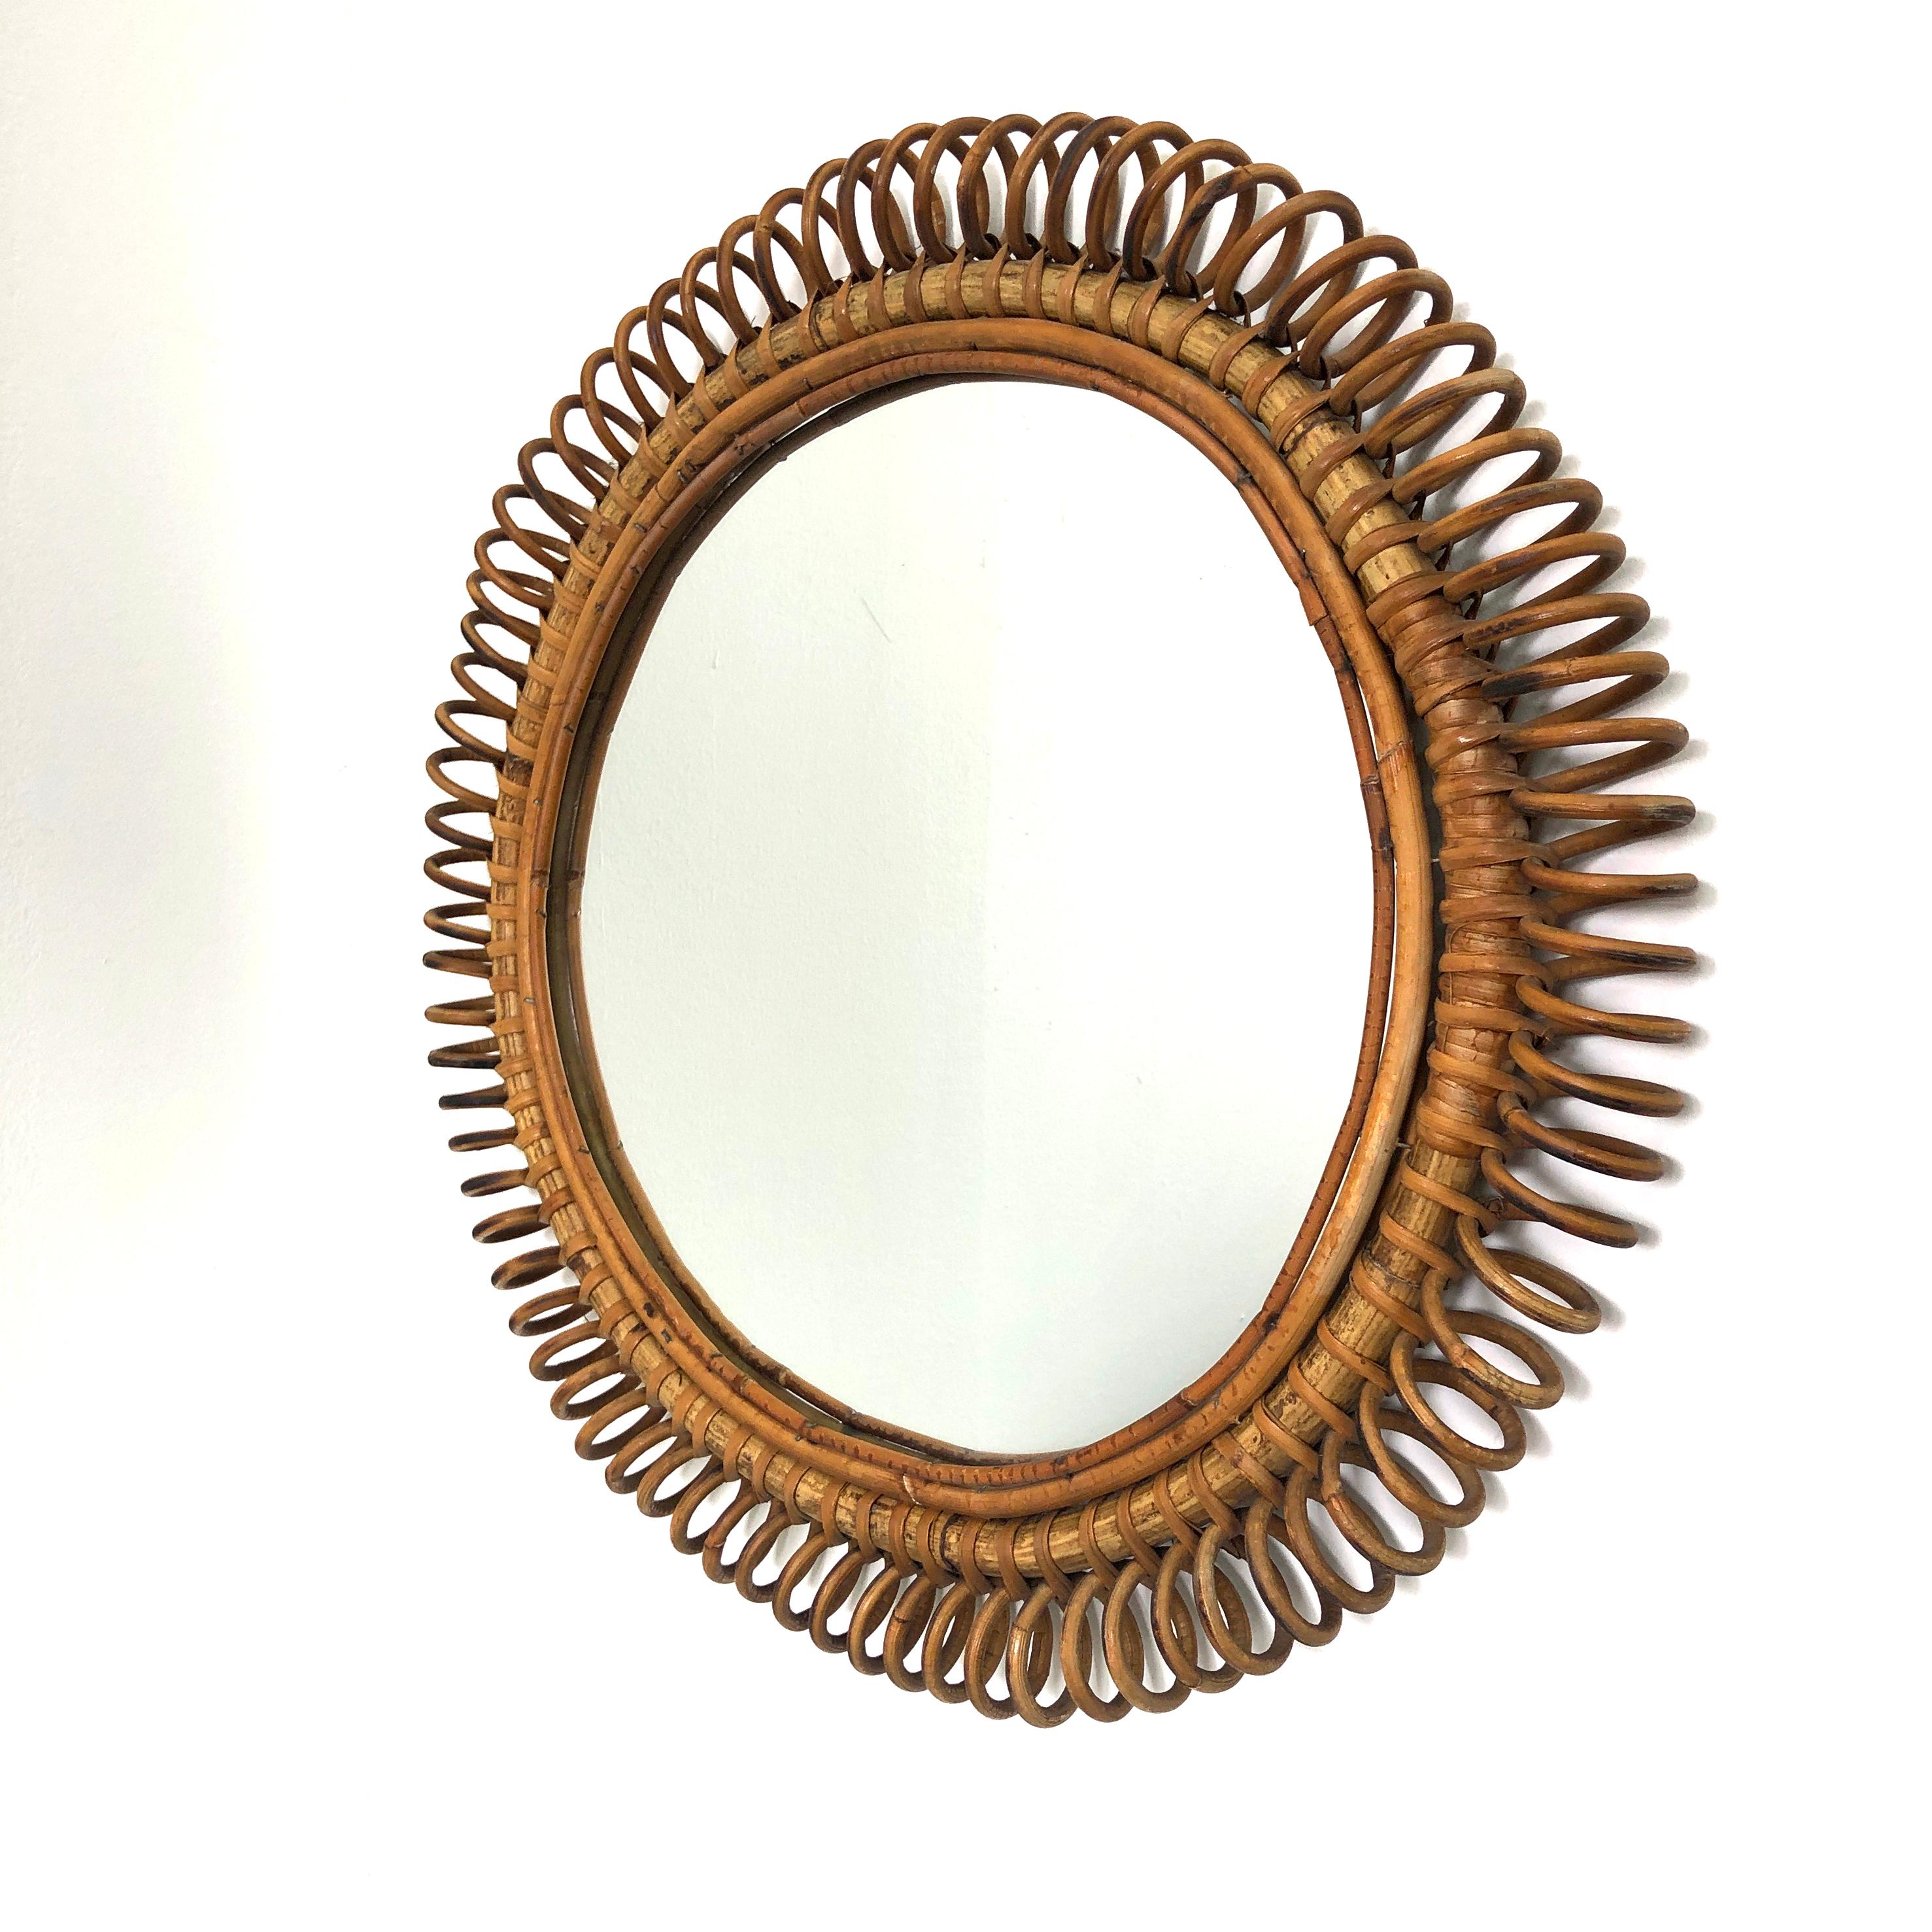 1960's round Italian rattan wall mirror. Rattan is worked in a deft curlicue fashion. This piece is very nicely proportioned and practically sized at 22